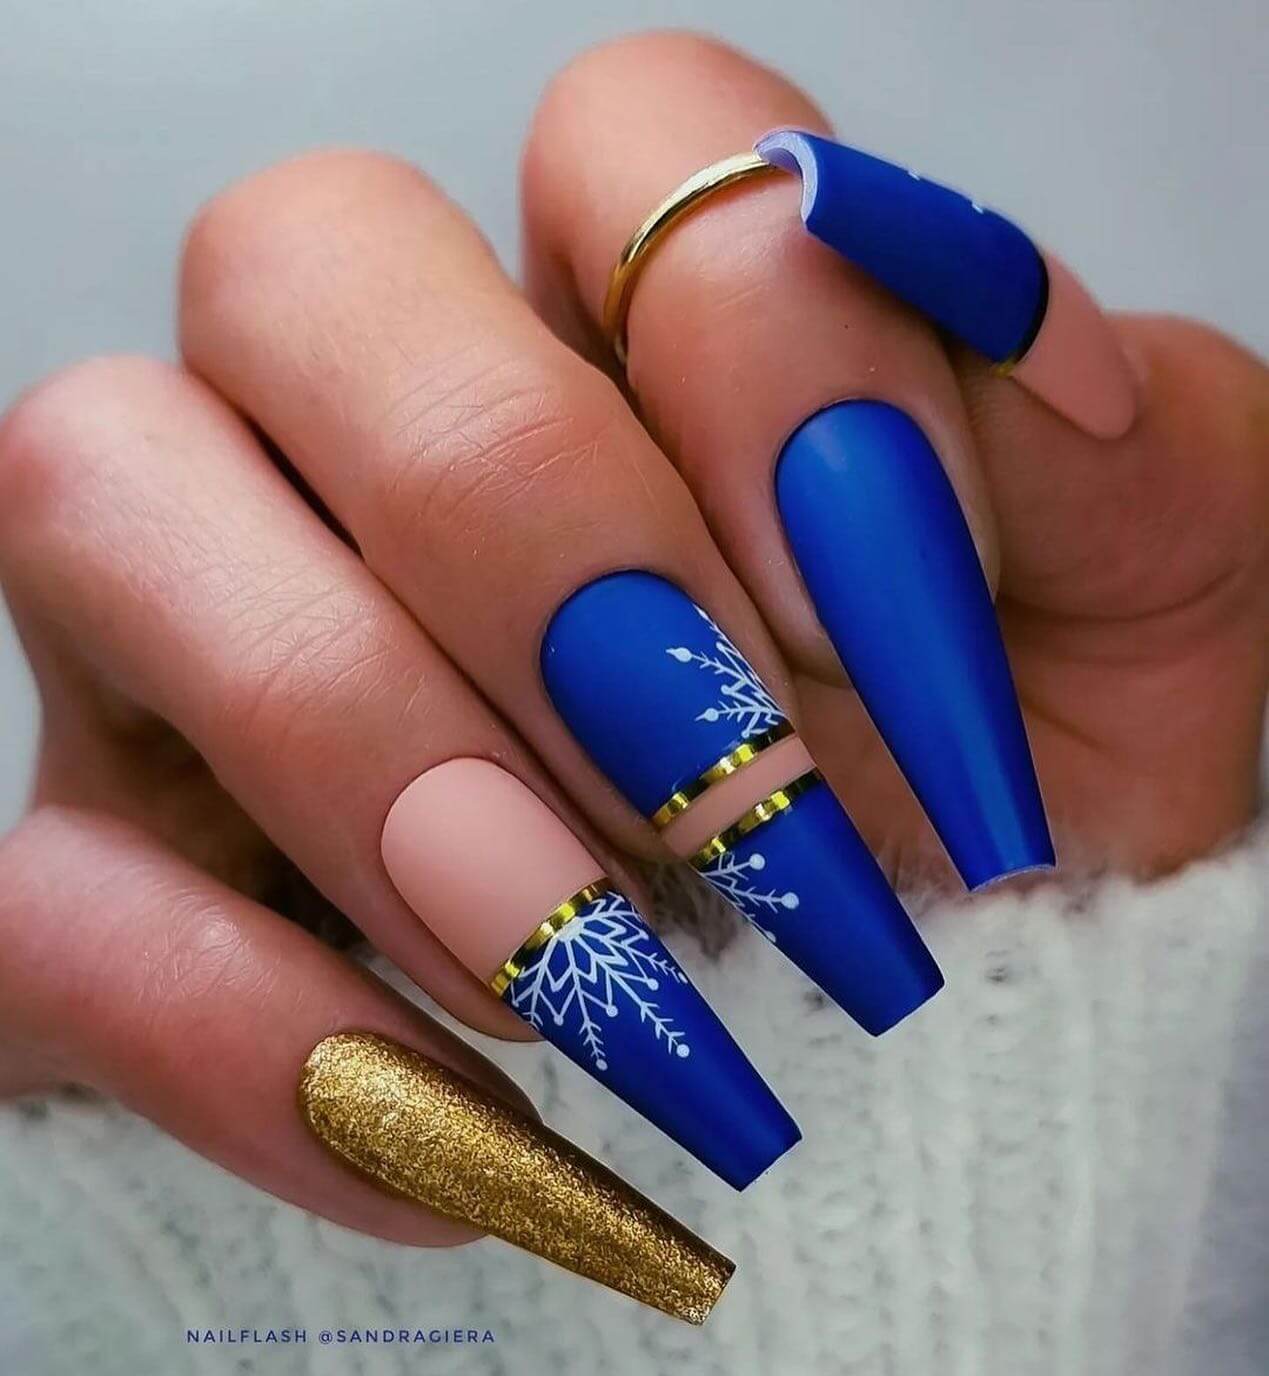 winter coffin nails